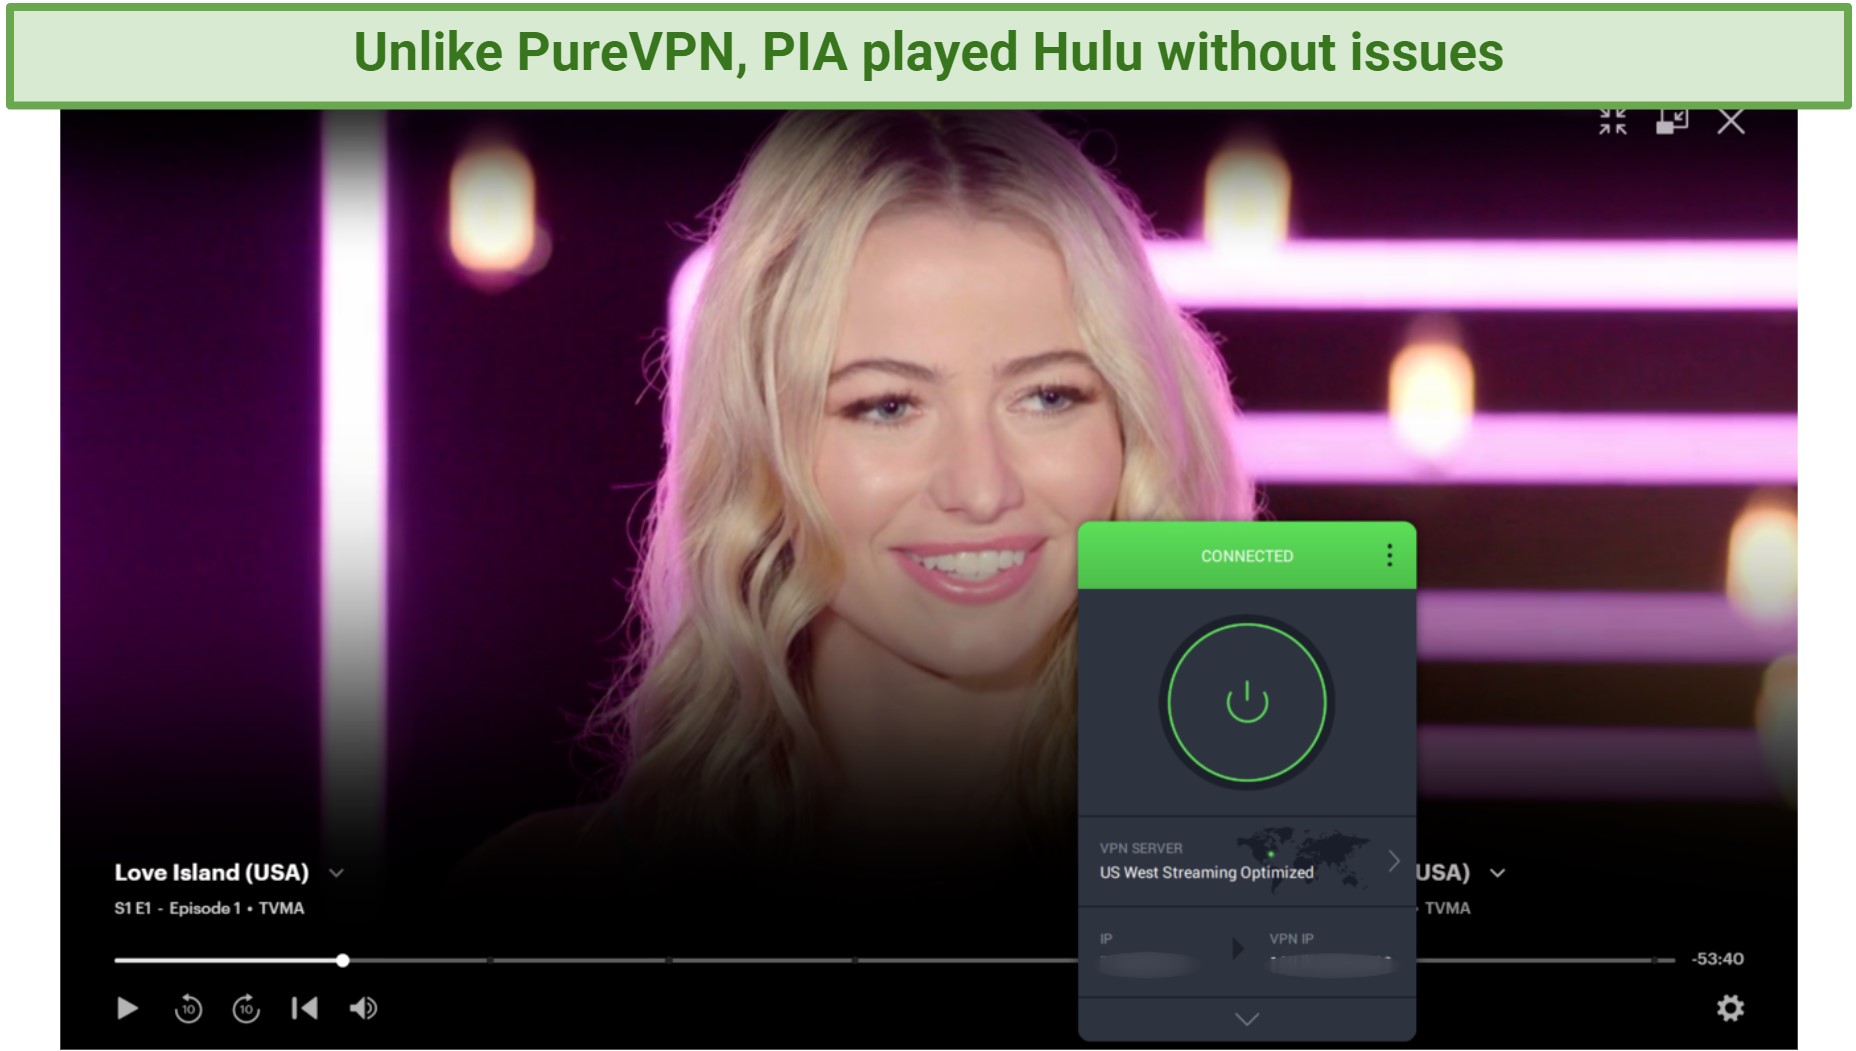 Screenshot of PIA connected while streaming Hulu